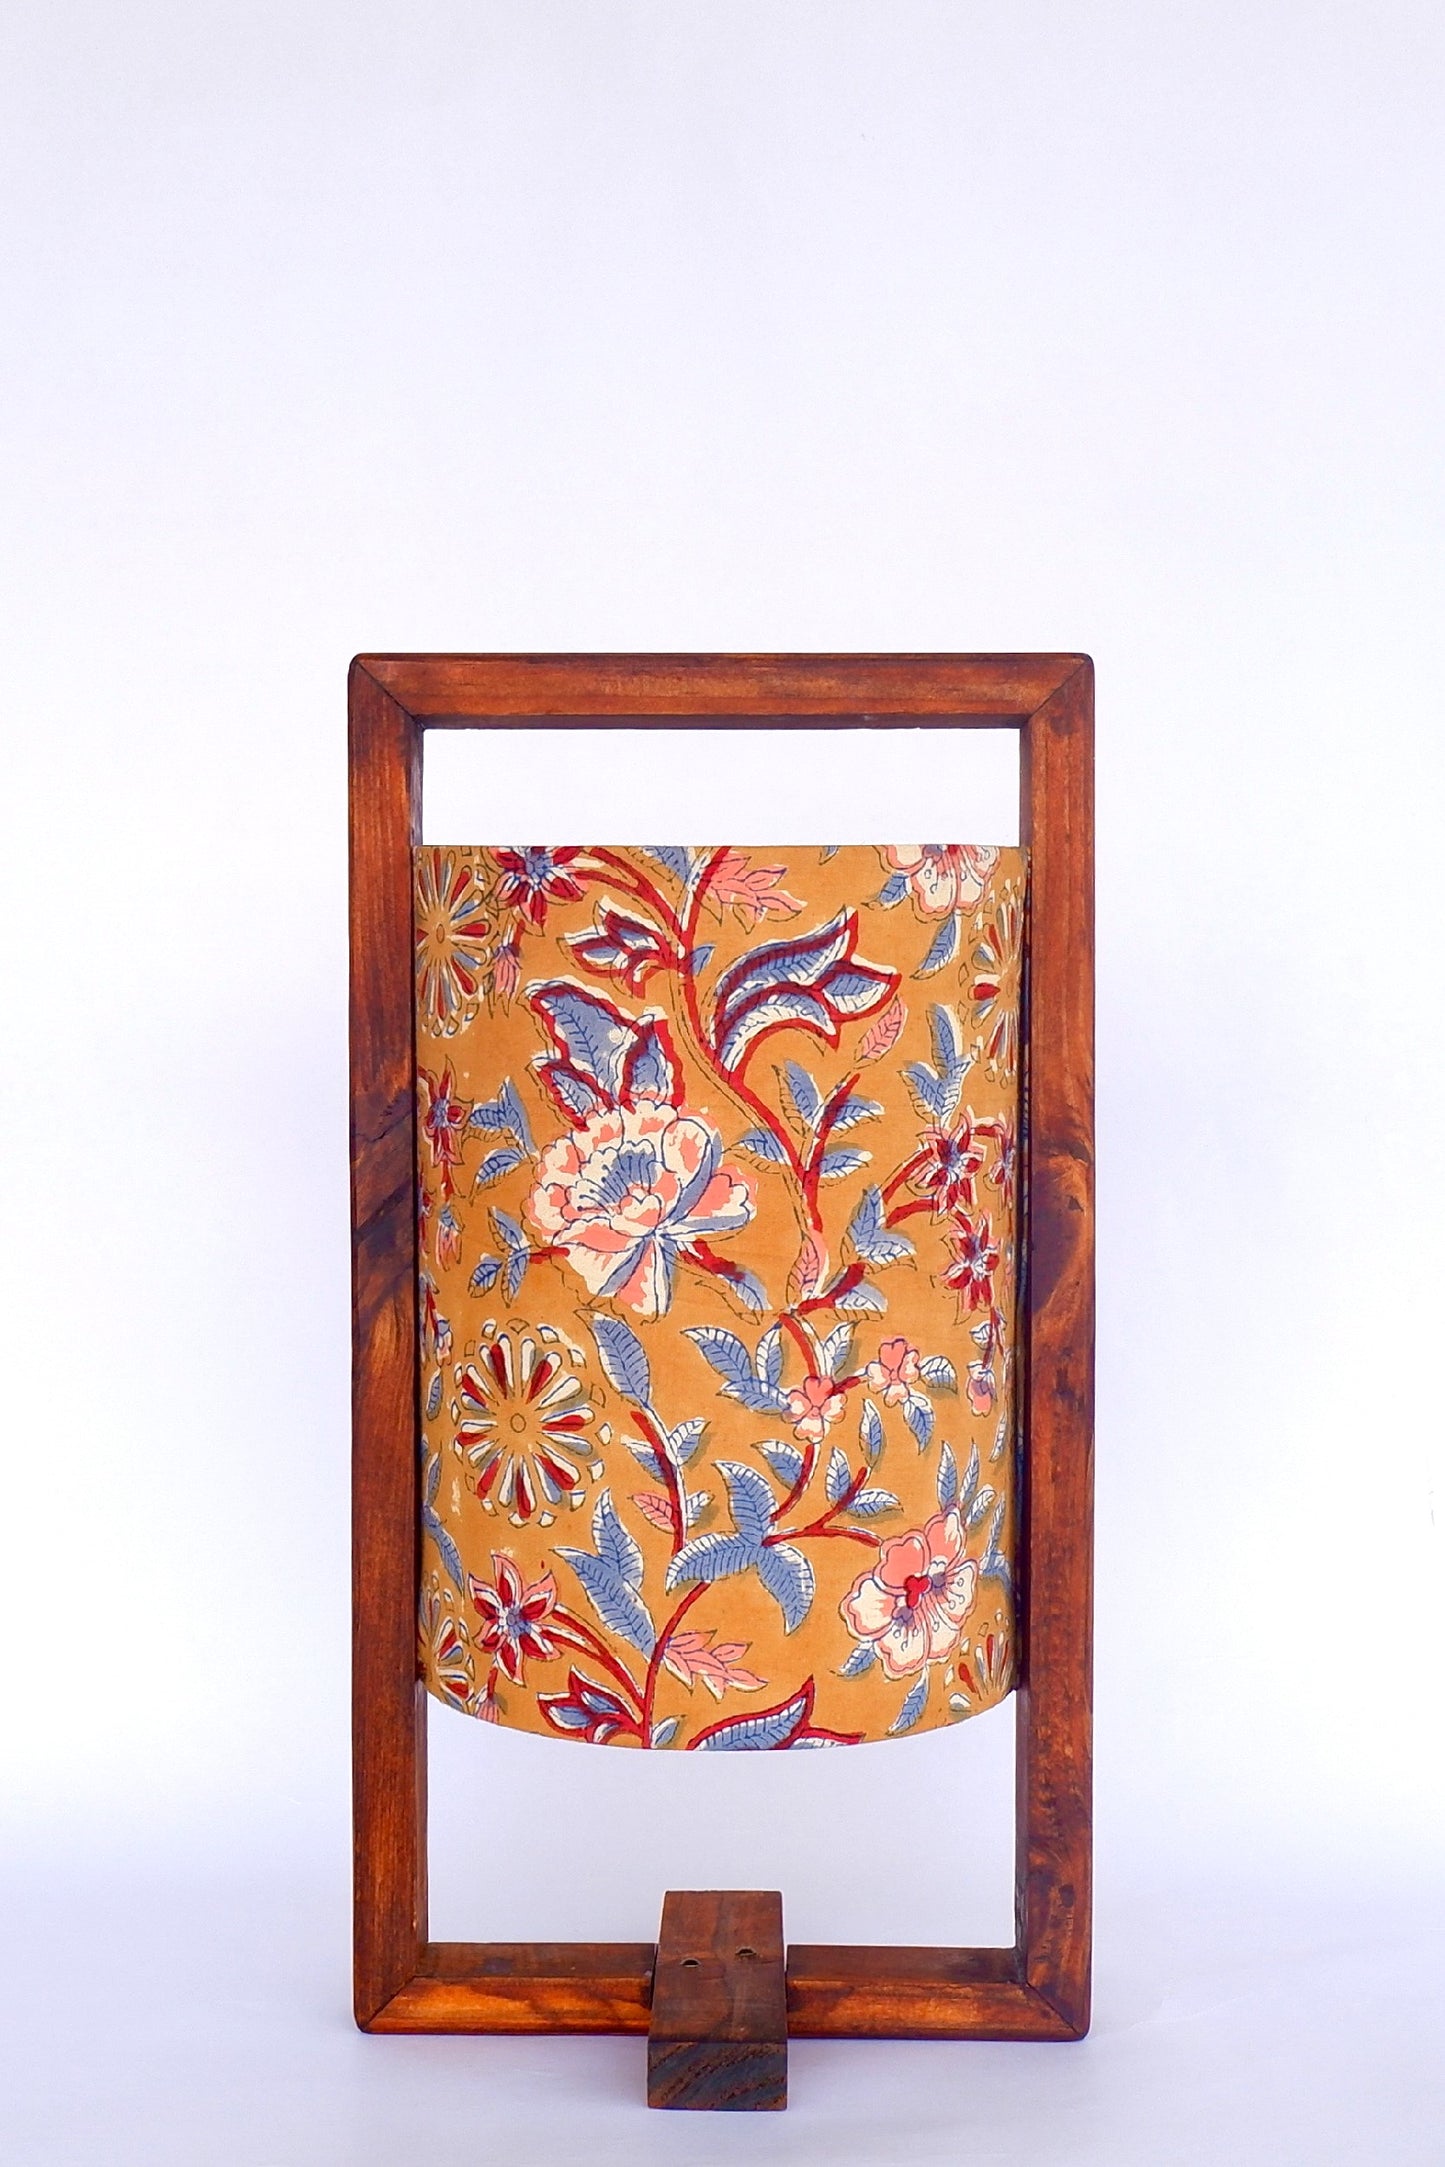 THE PLUS WOODEN TABLE LAMP CARAMEL YELLOW FLORAL PRINT